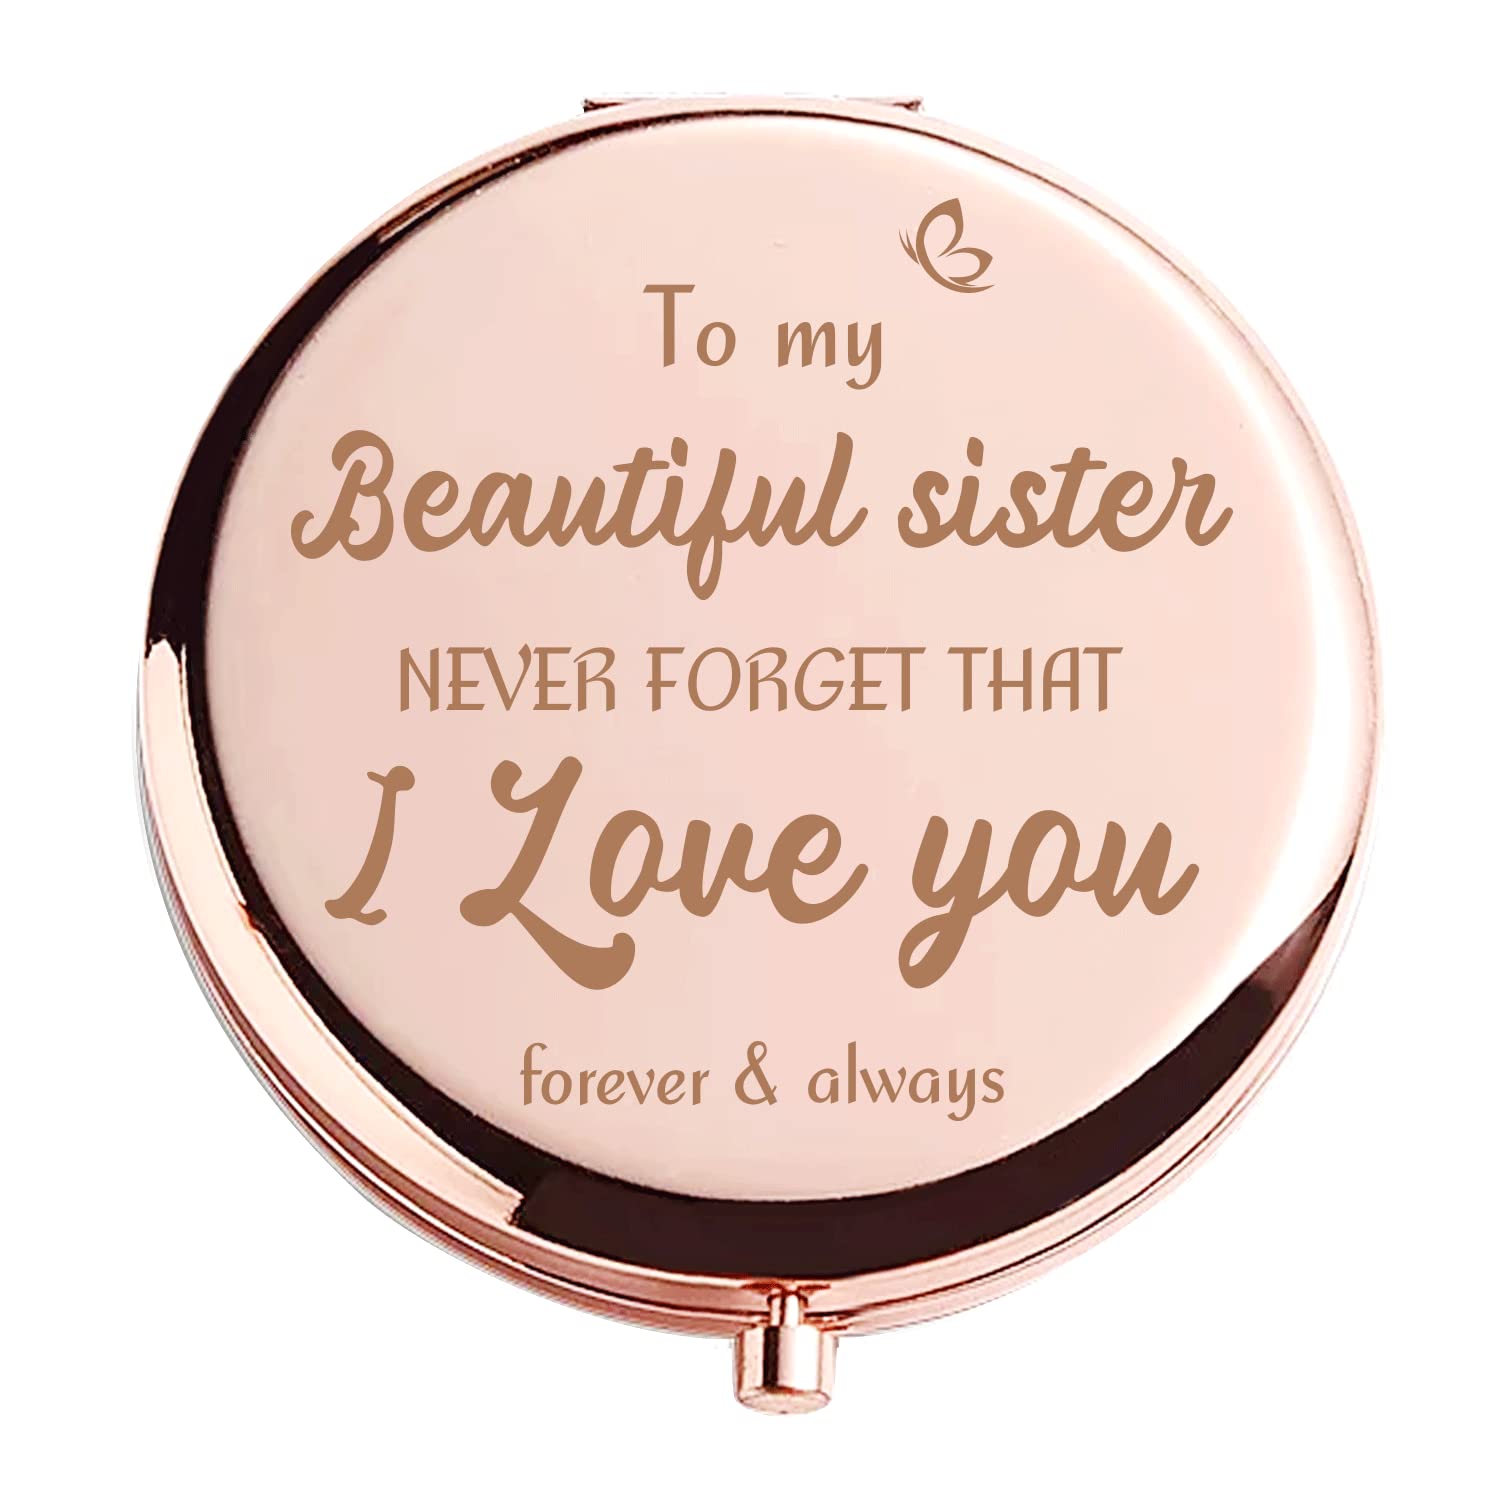 Amazon.com: Sister Gifts from Sister, Birthday Gifts for Sister from  Brother, Gift Sister Desk Wood Sign Keepsake, Sister-in-Law Birthday Gift,  Dear Sister Gift Mother's Day Christmas Table Plaque : Home & Kitchen